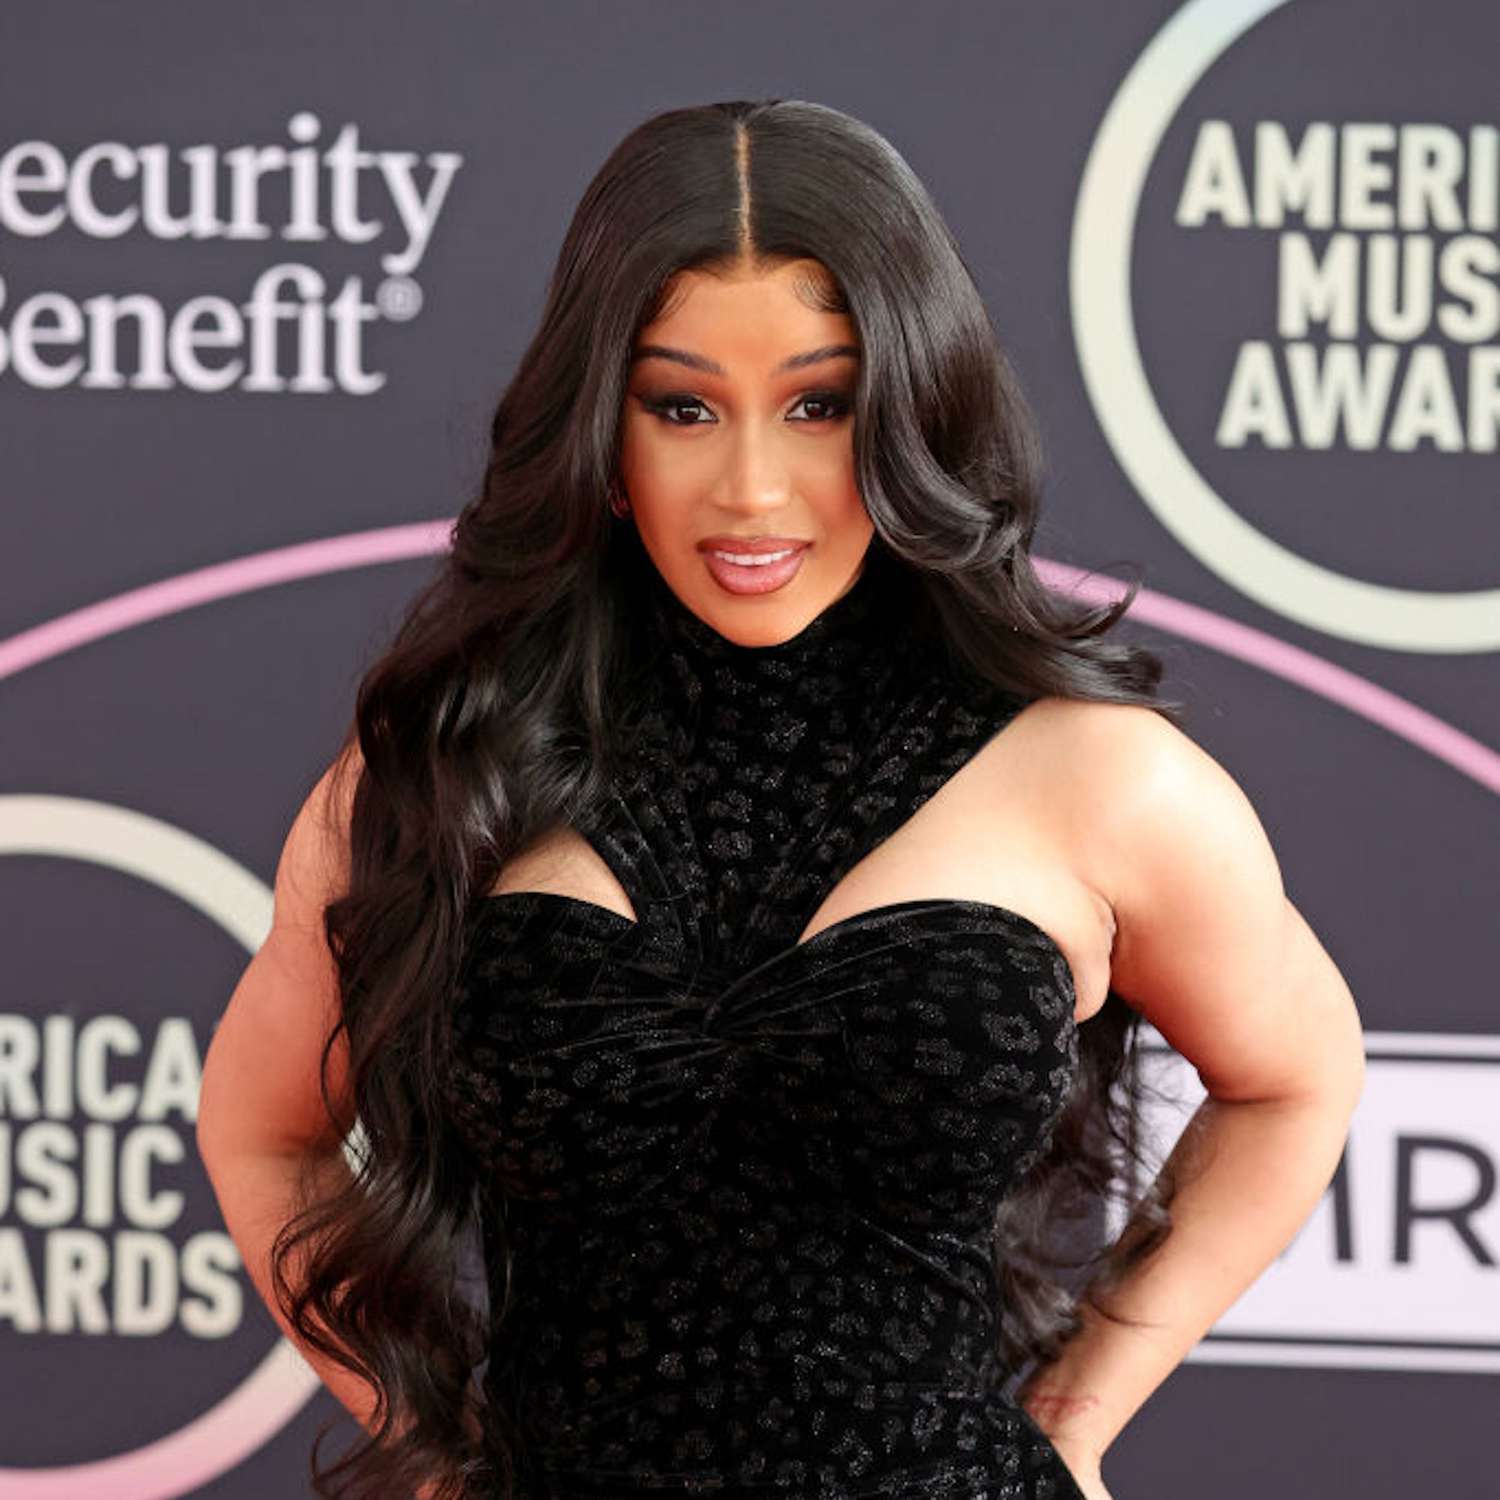 Cardi B with center-parted hair with flowing tendrils